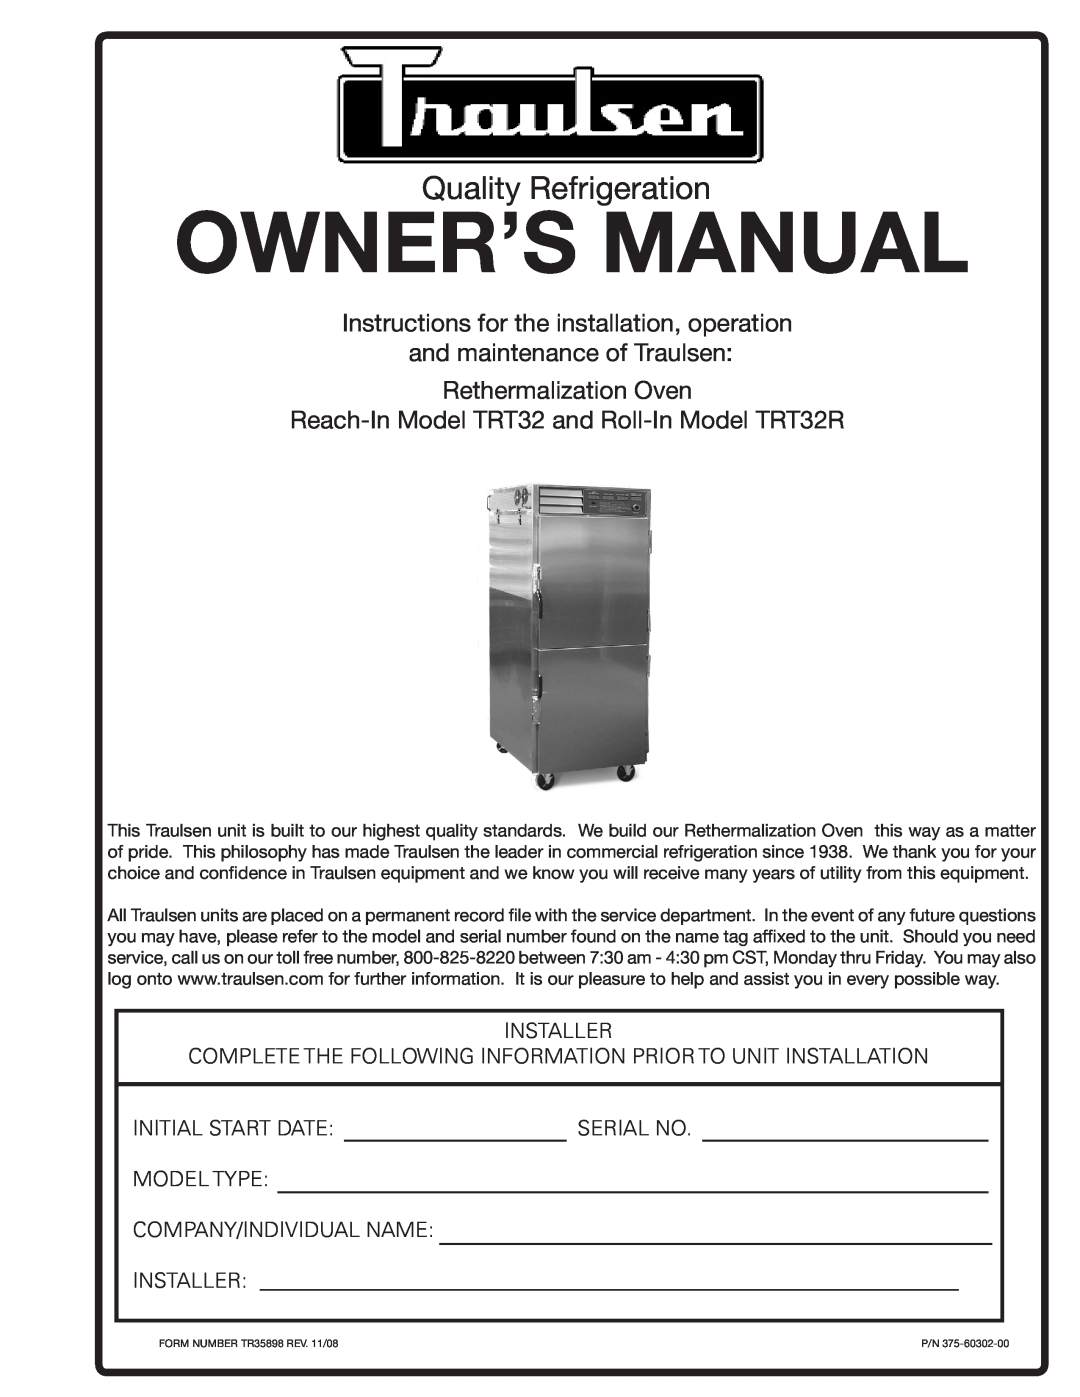 Traulsen owner manual Rethermalization Oven, Reach-InModel TRT32 and Roll-InModel TRT32R, Installer, Initial Start Date 